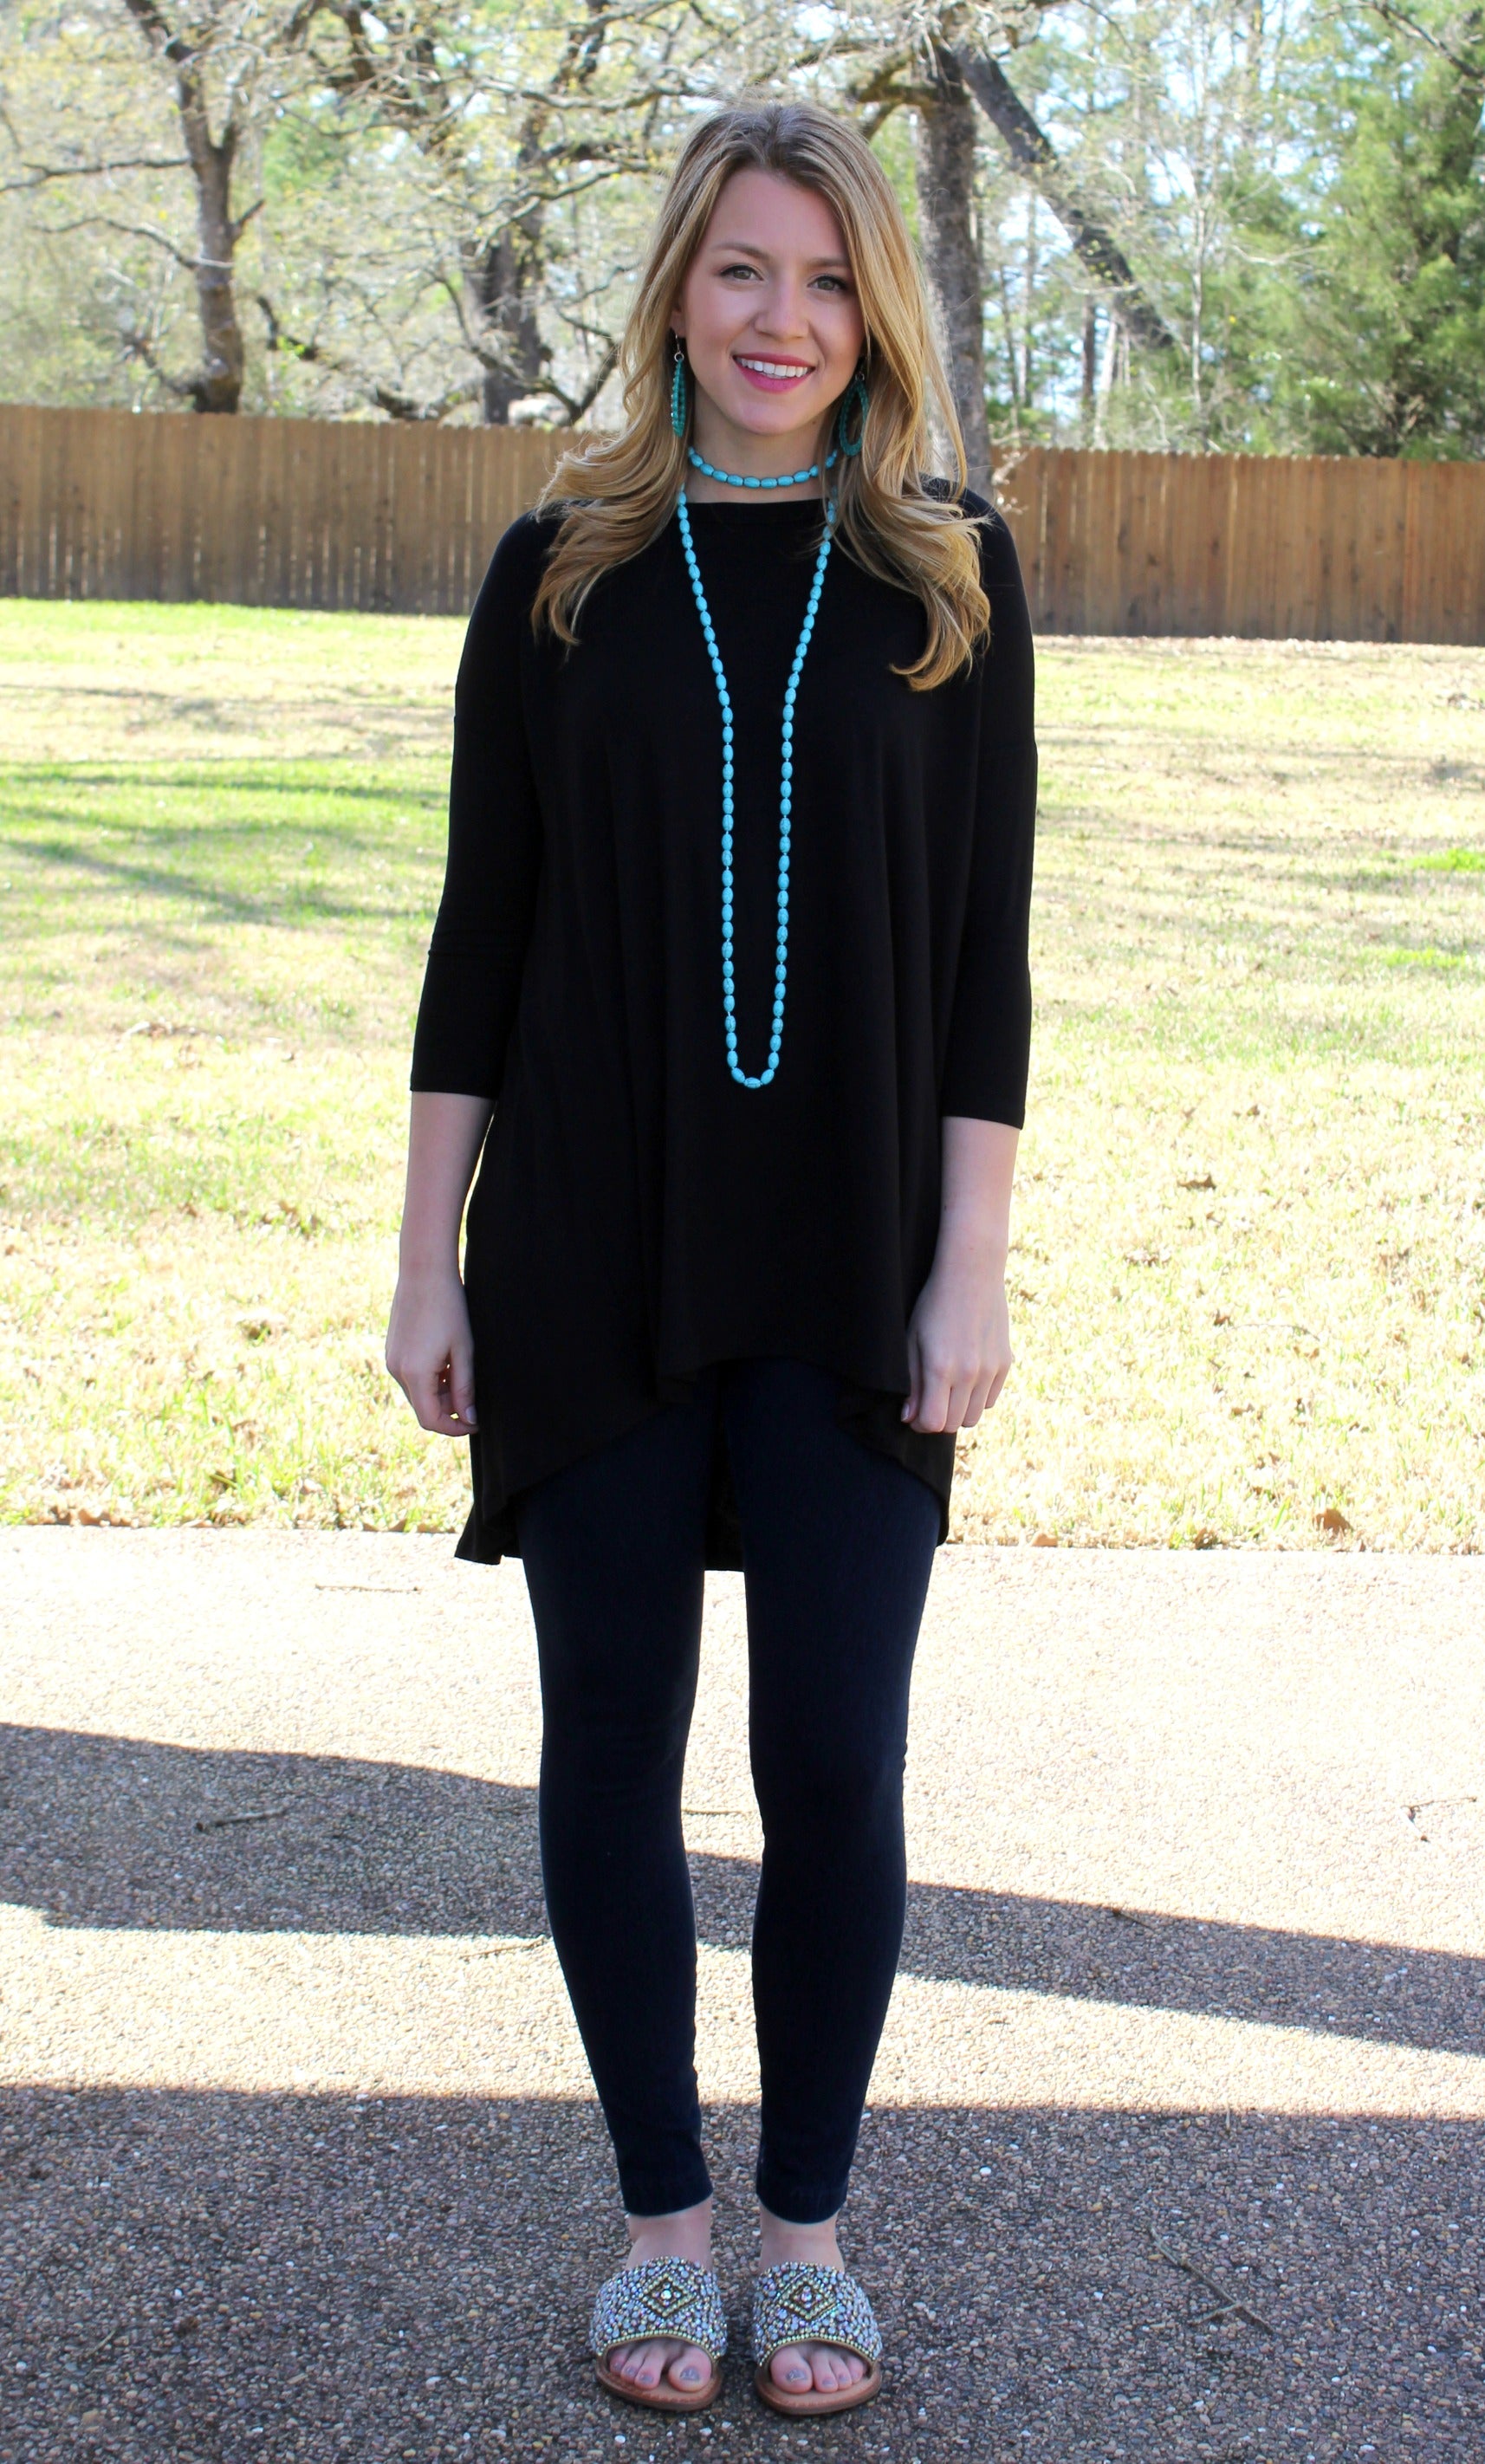 Last Chance Size Small | Casual Love Tunic Top with Criss Cross Back Detail in Black - Giddy Up Glamour Boutique